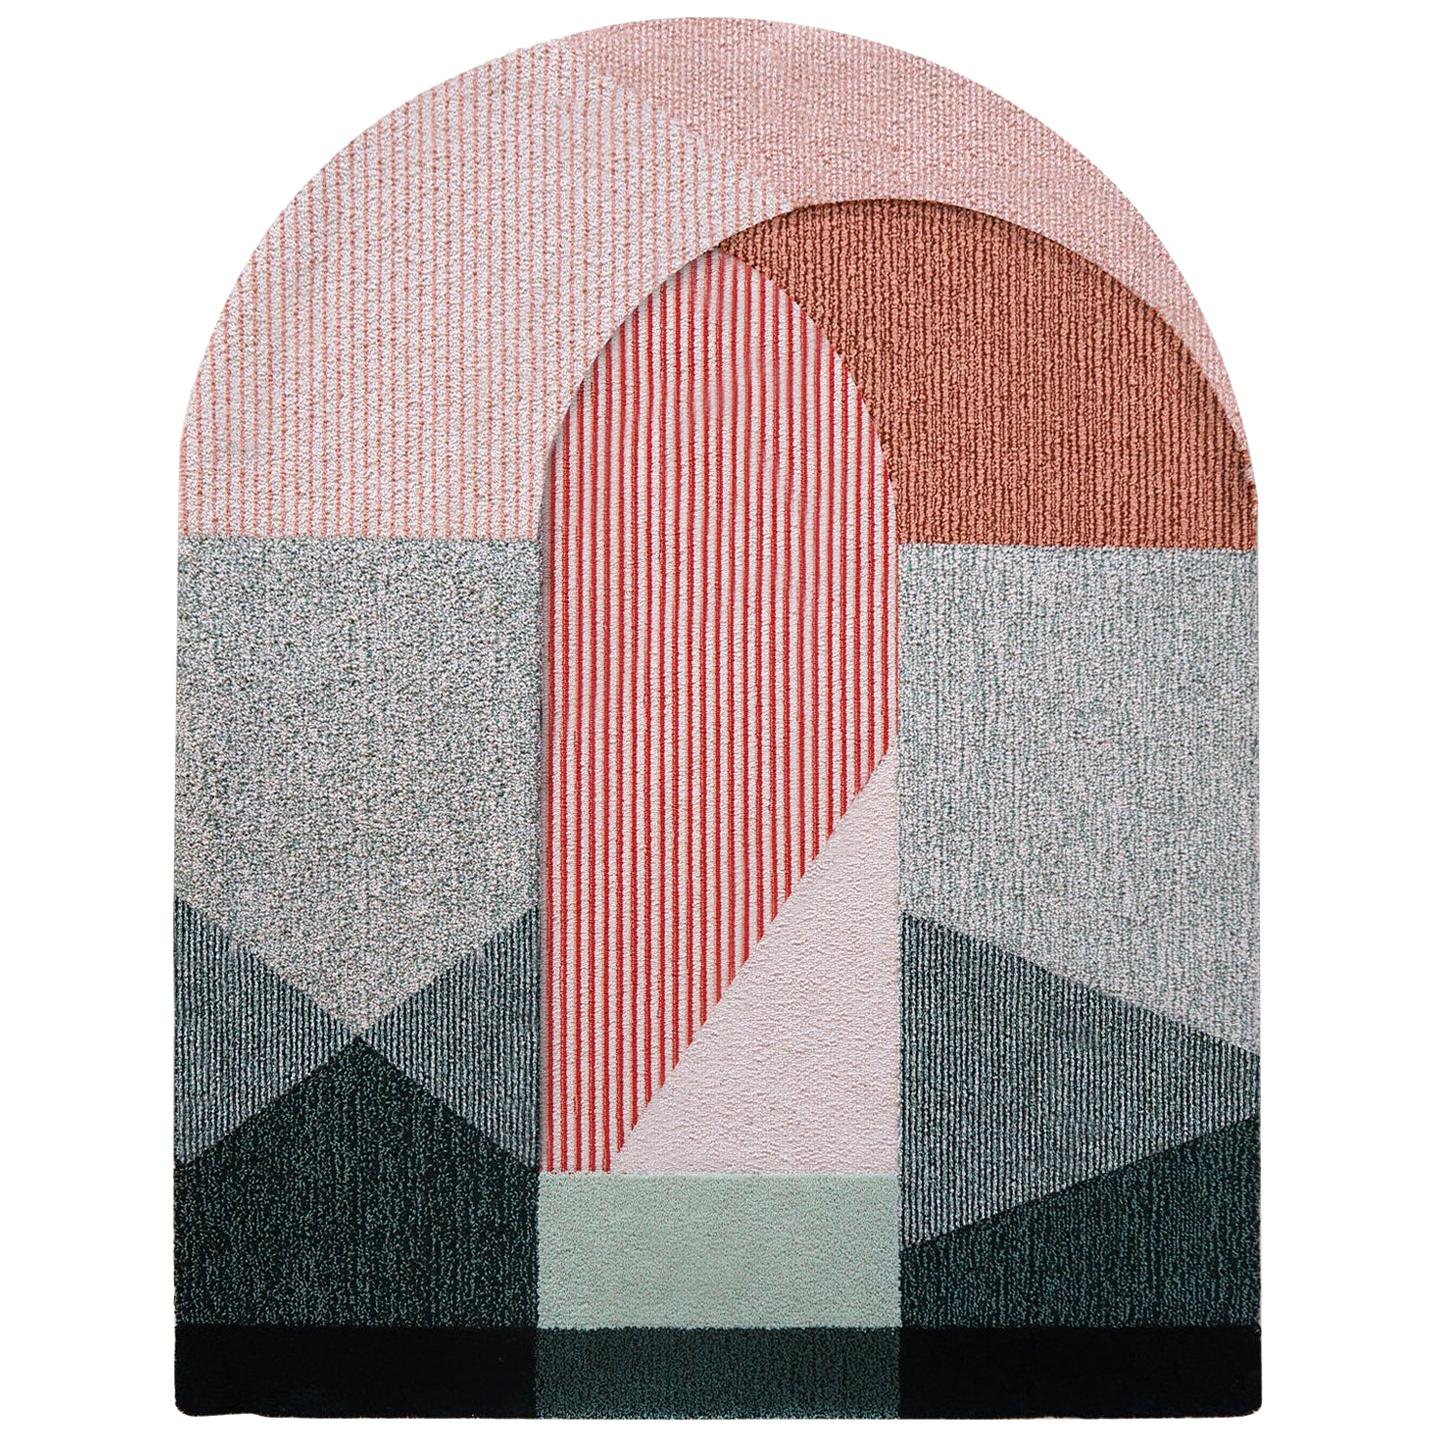 Sottoportico Extra Large Full Colors Rug 100% Wool by Portego